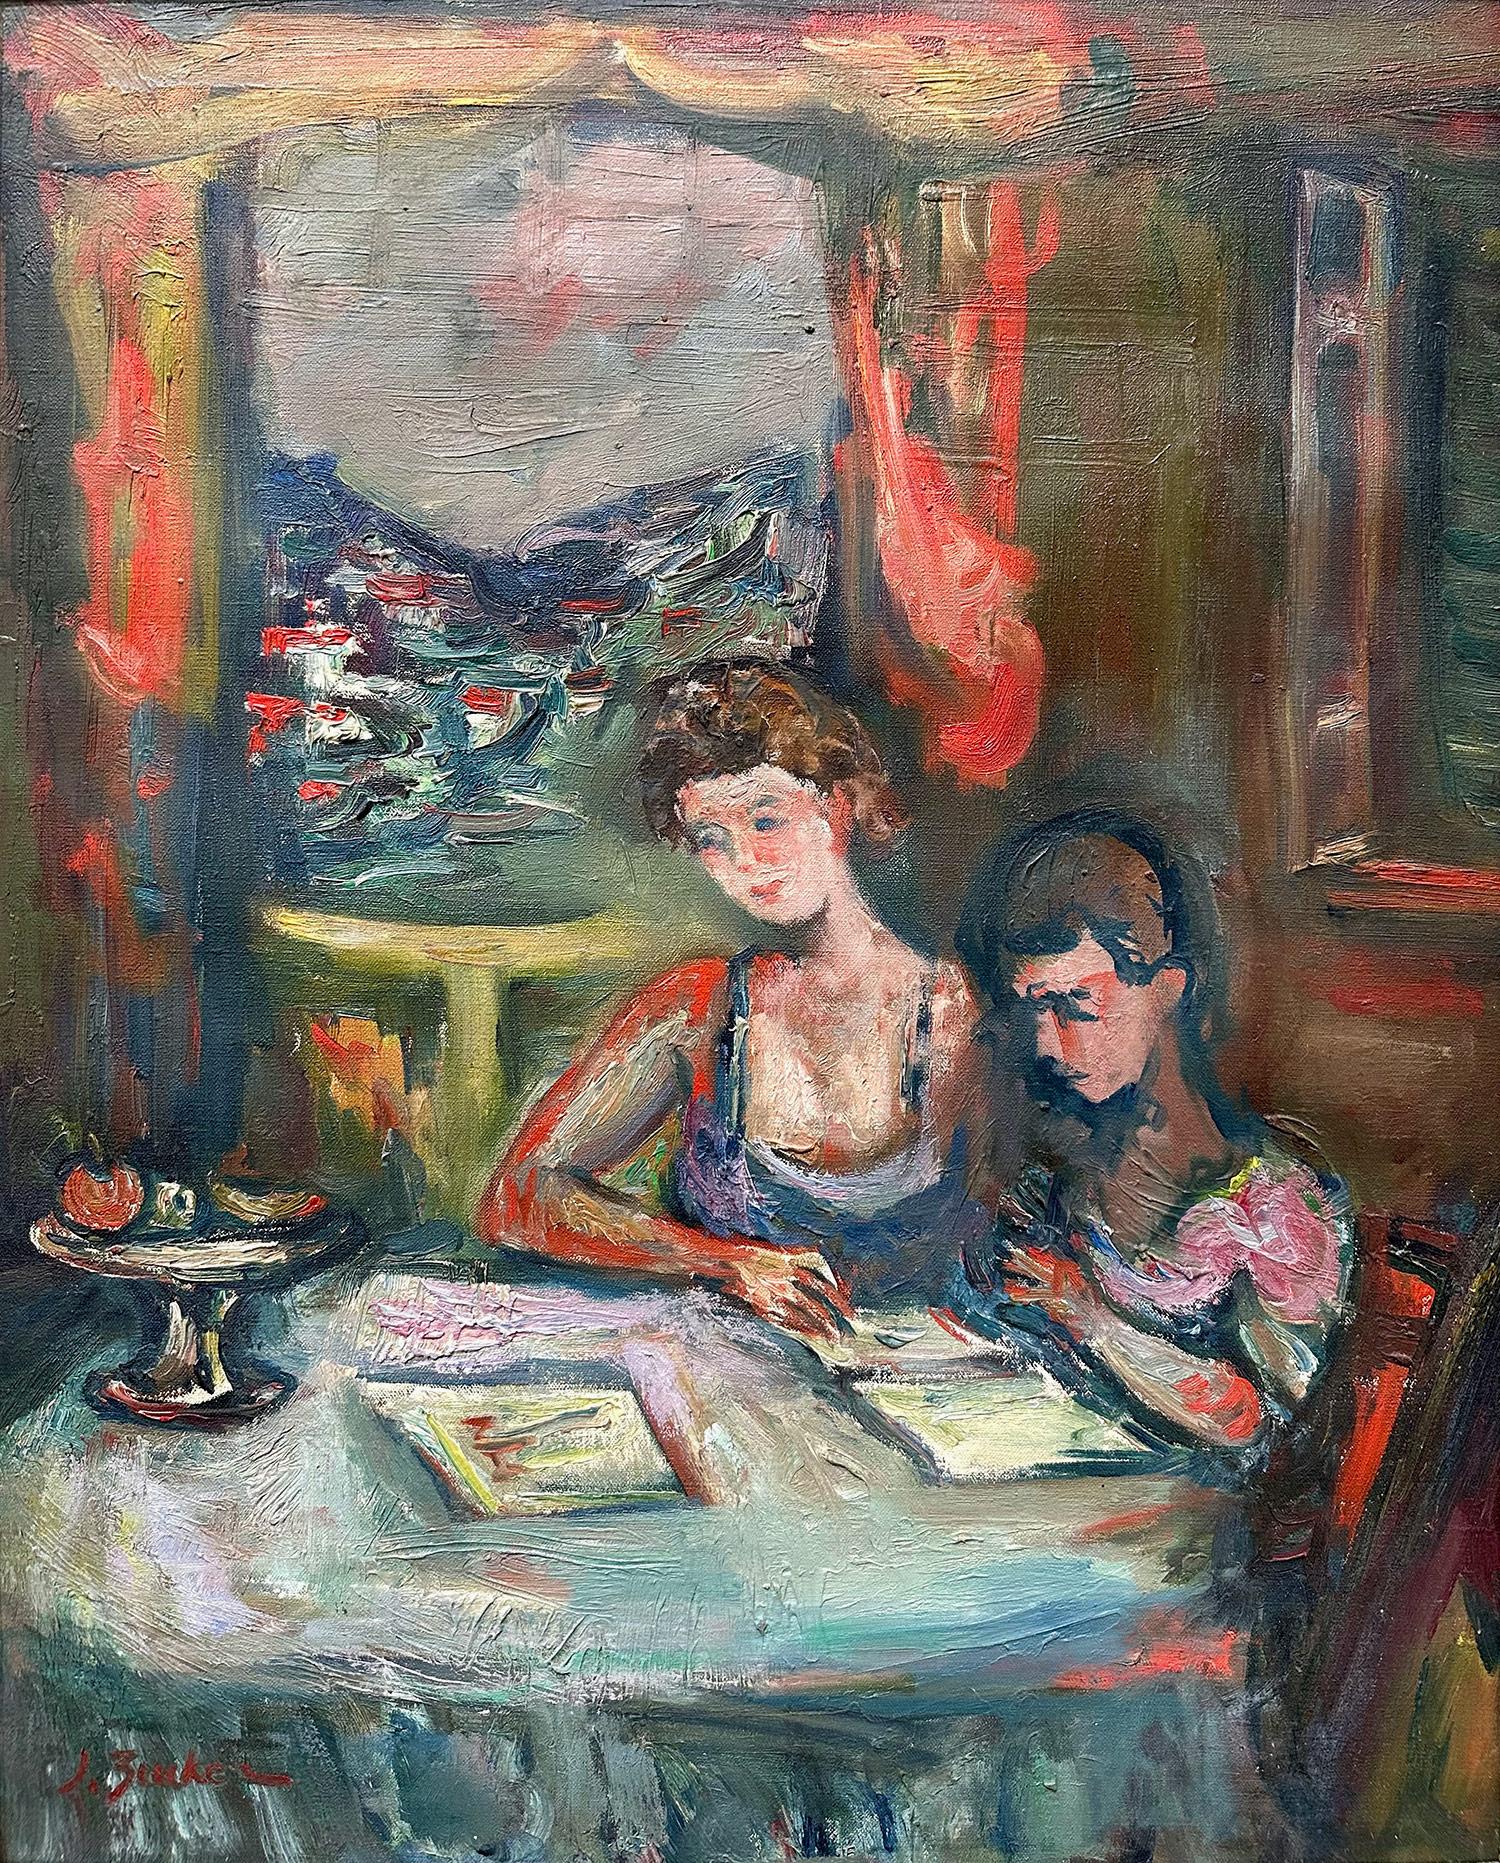 A charming oil painting depicting an interior scene of a mother and child reading together while sitting on a table round table with a mantel, and a window on the background with the view of the town. Done in a highly impressionistic manner with